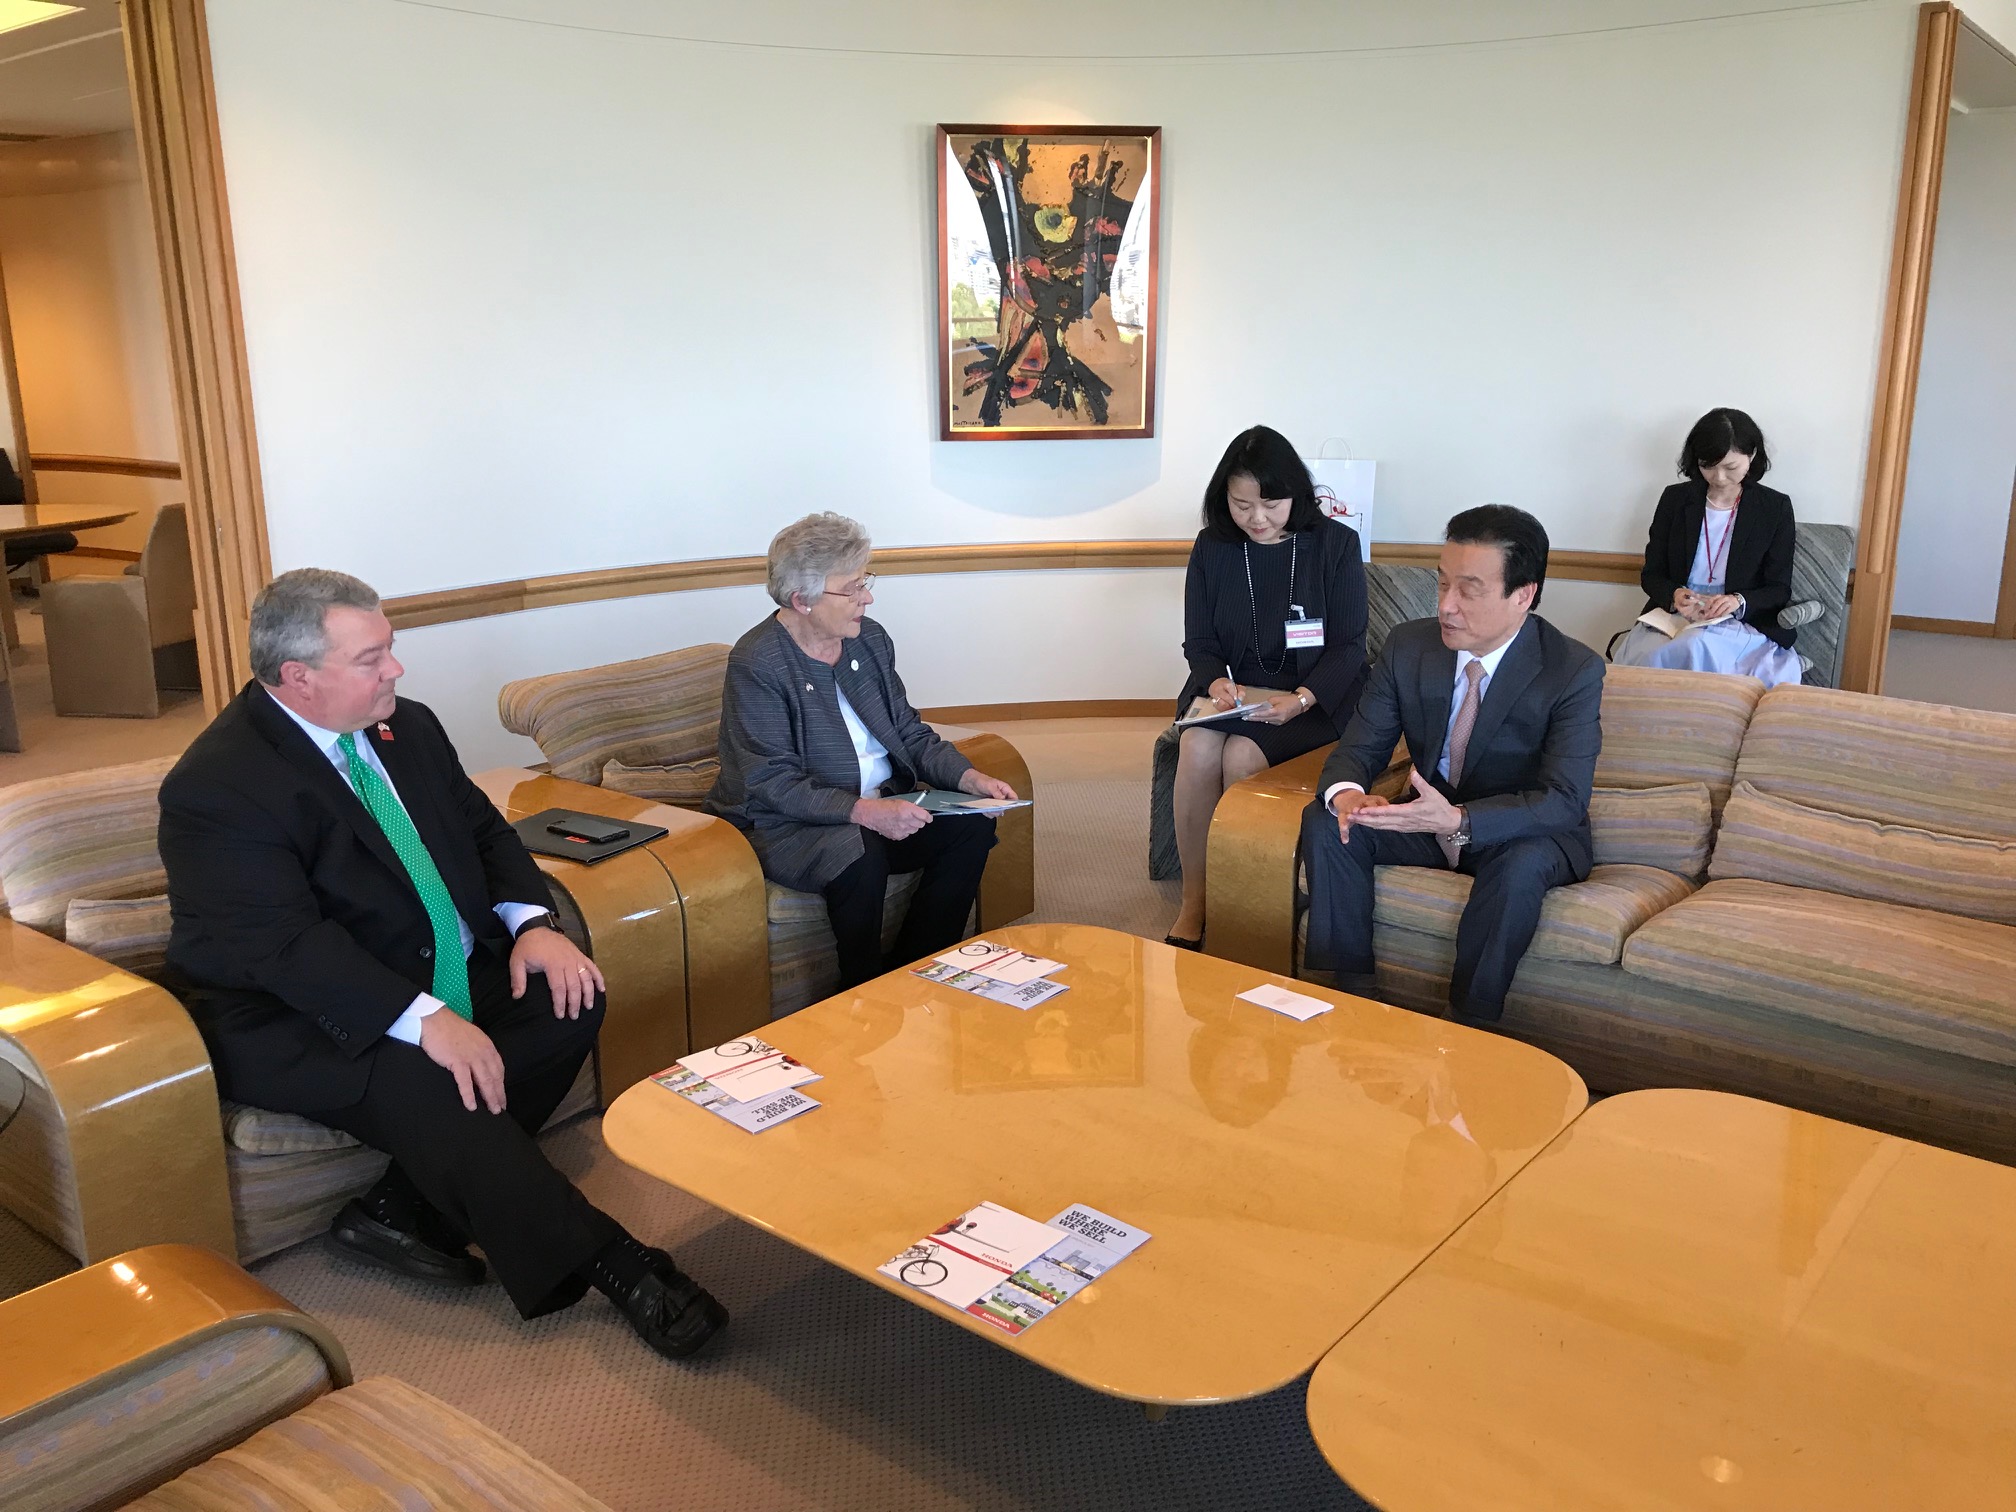 Governor Ivey and Team Return Home After Productive Japan Talks